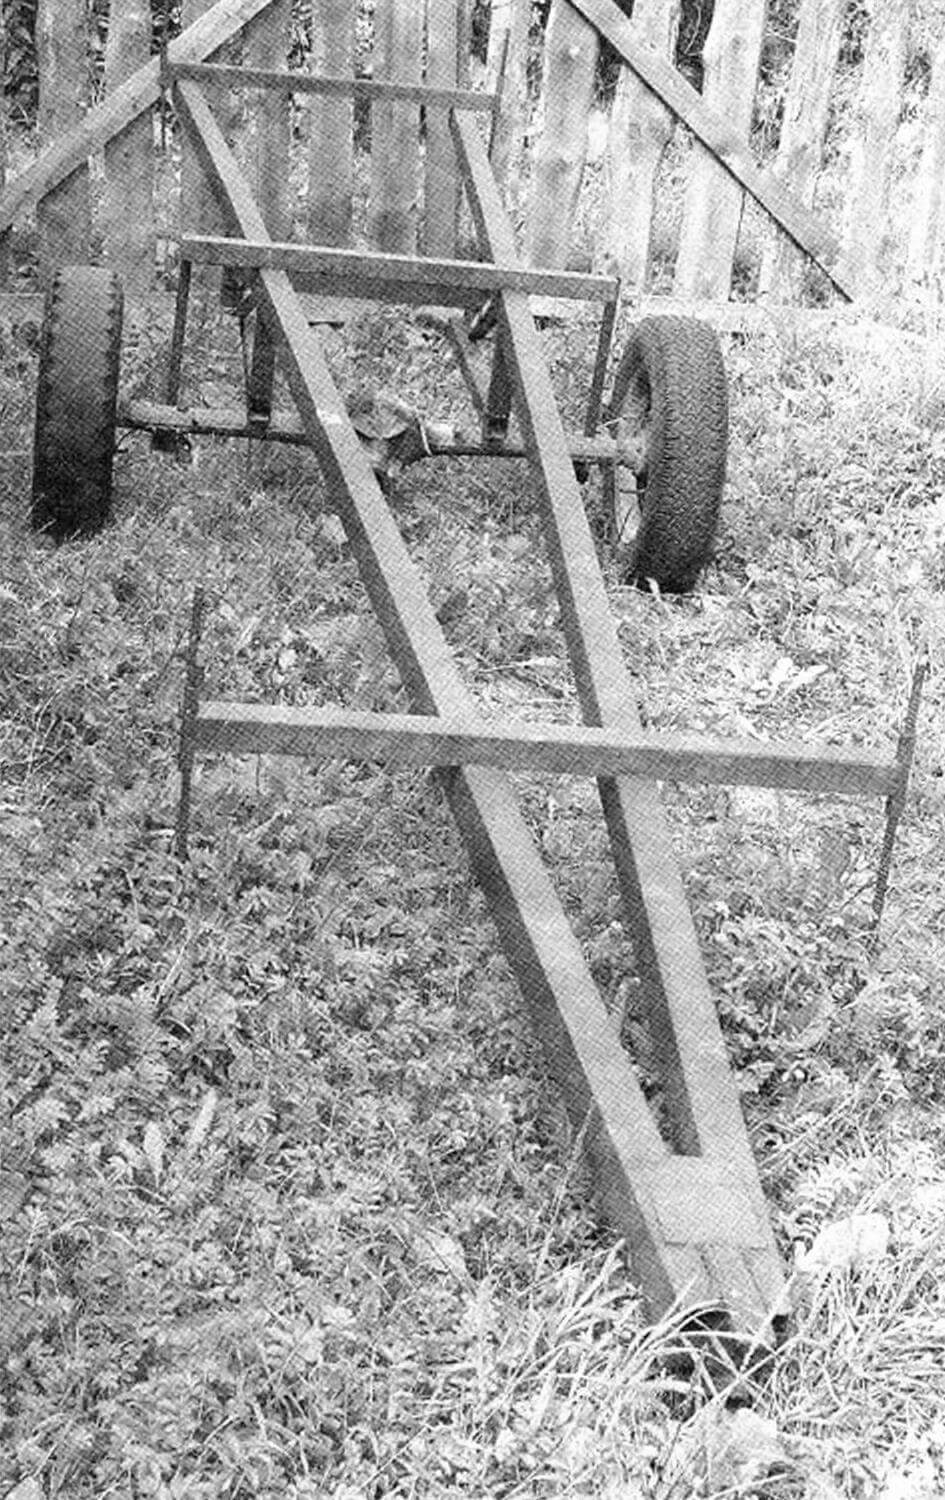 Semi-trailer with a load capacity of 500 kg with a frame from an old bed with armored mesh